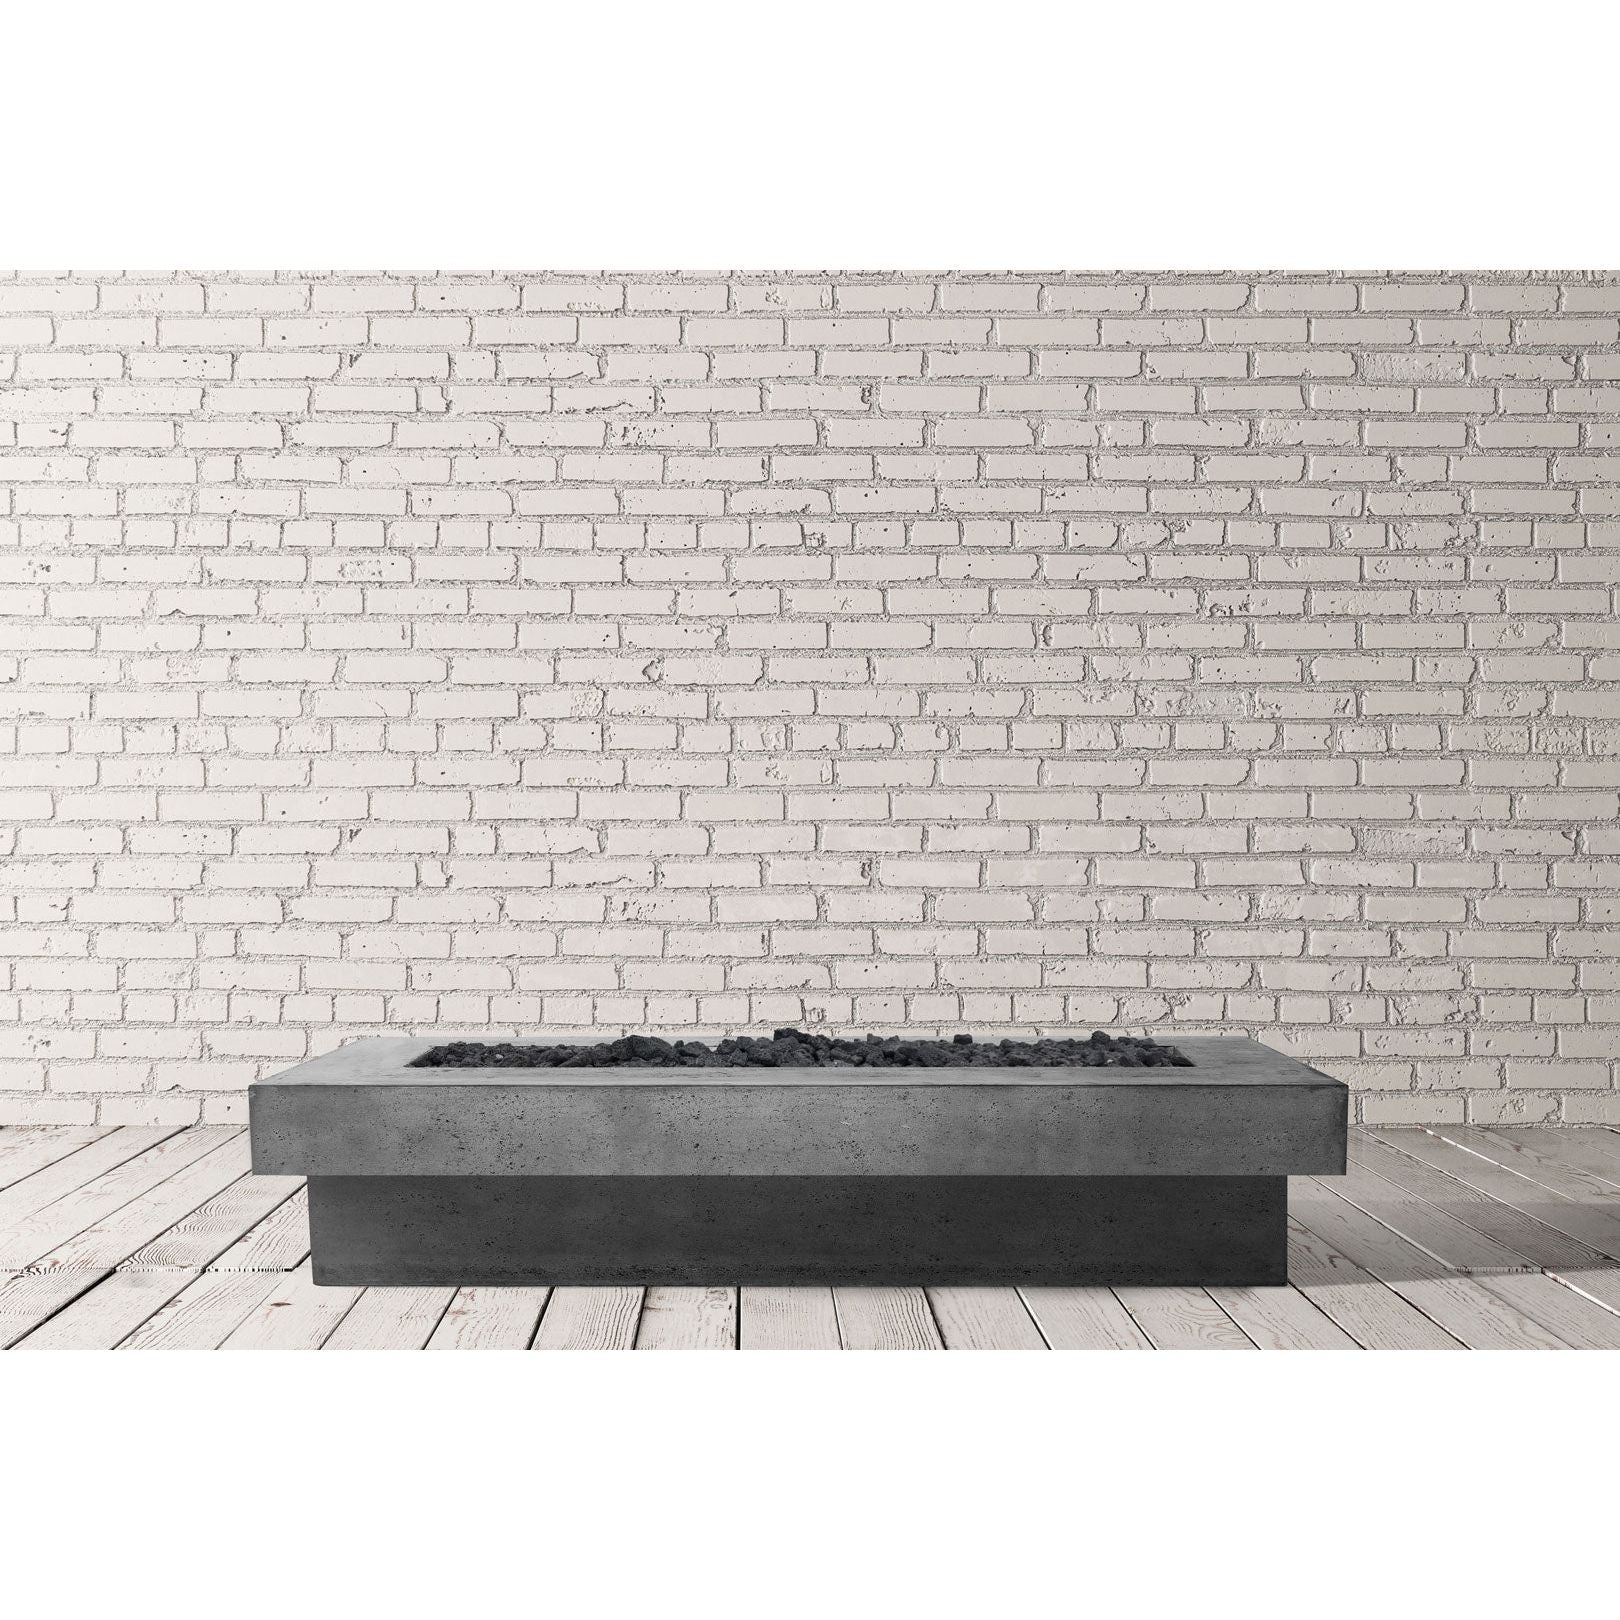 Elevate Fire Table in GFRC Concrete by Prism Hardscapes - Majestic Fountains and More